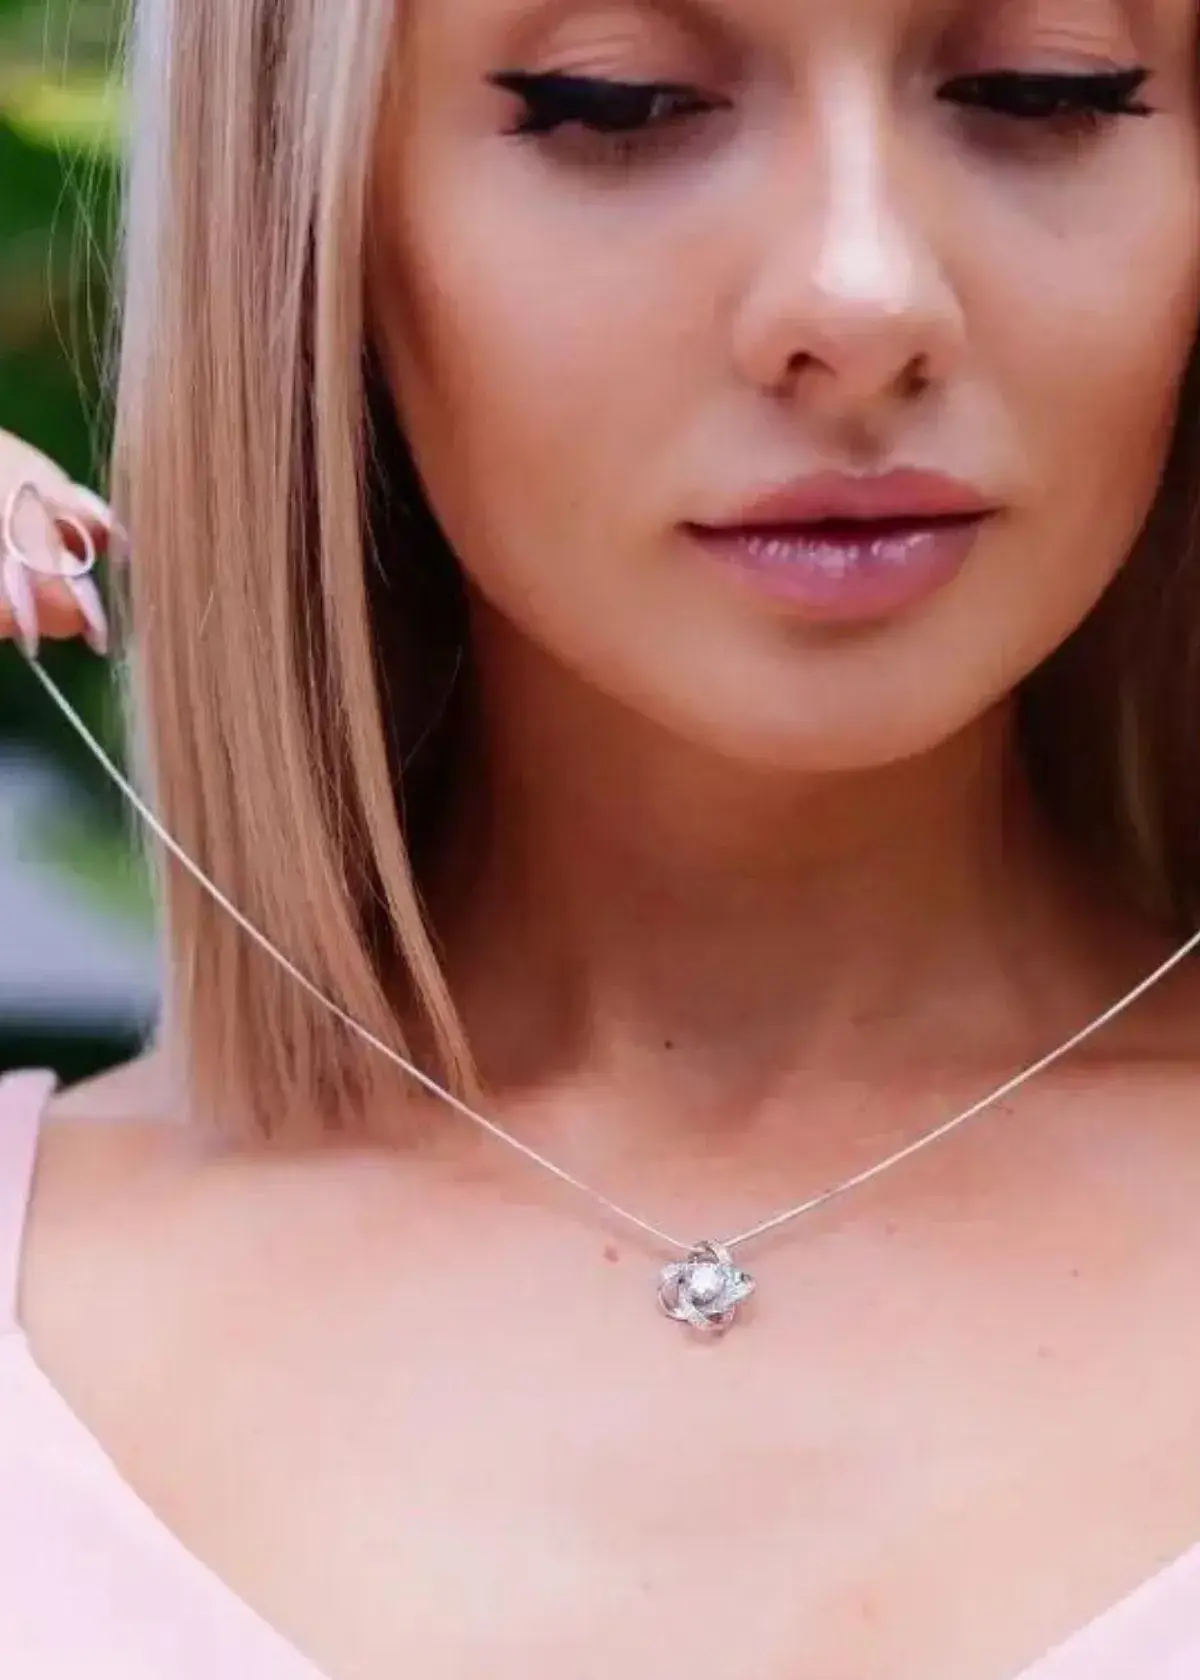 How to Choose the best Half Chain Half Pearl Necklace?